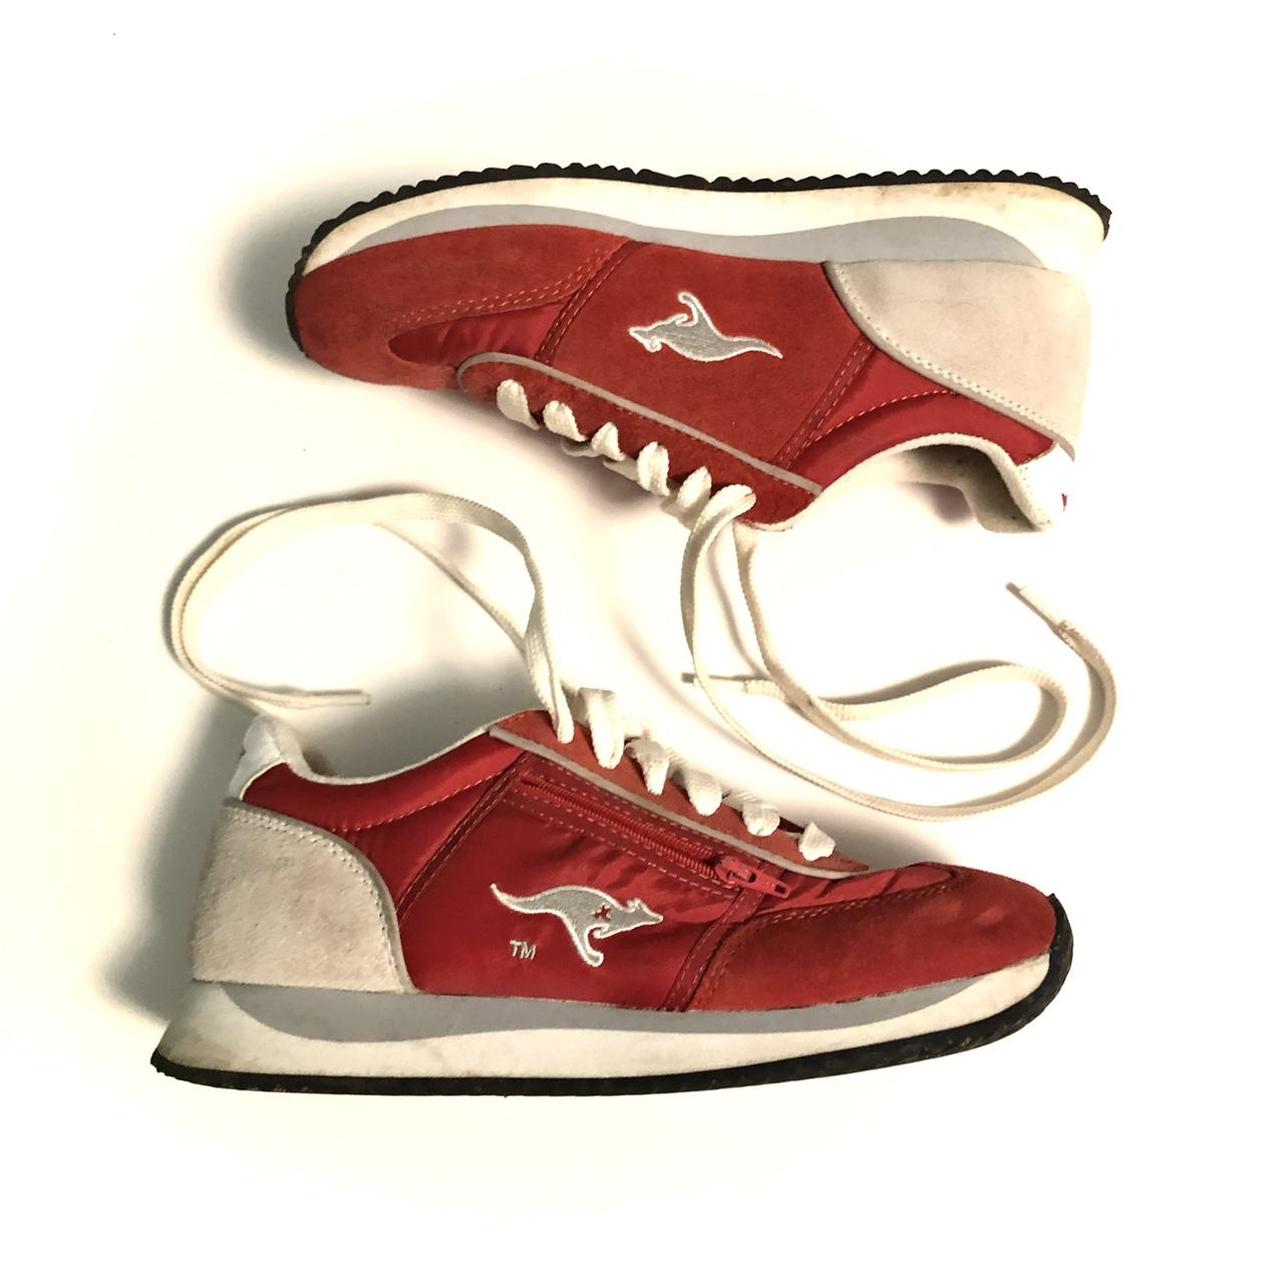 KangaROOS Women's White and Red Trainers